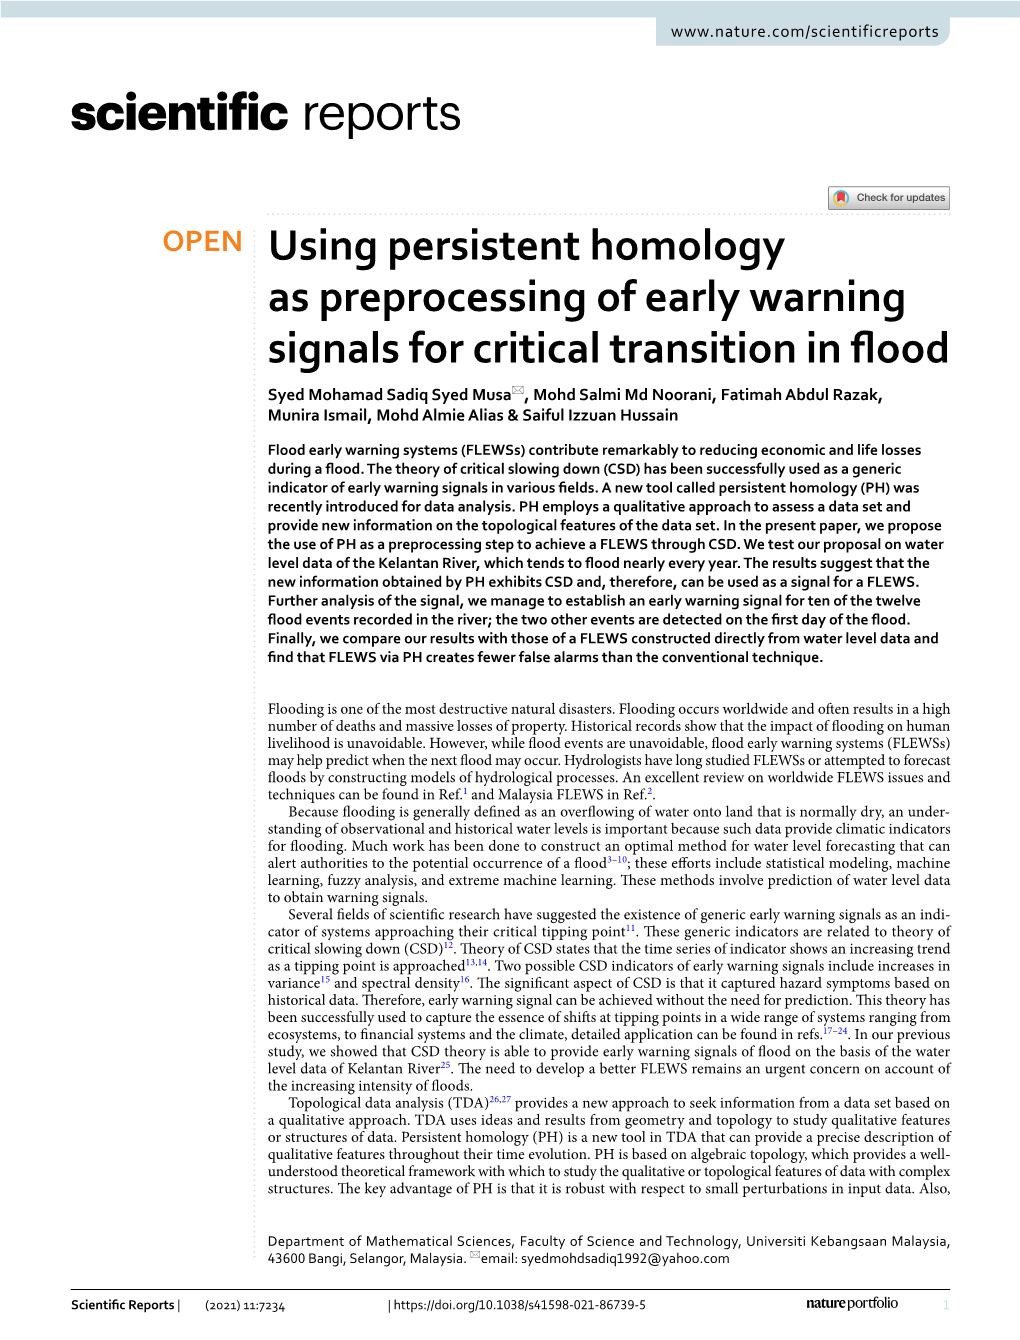 Using Persistent Homology As Preprocessing of Early Warning